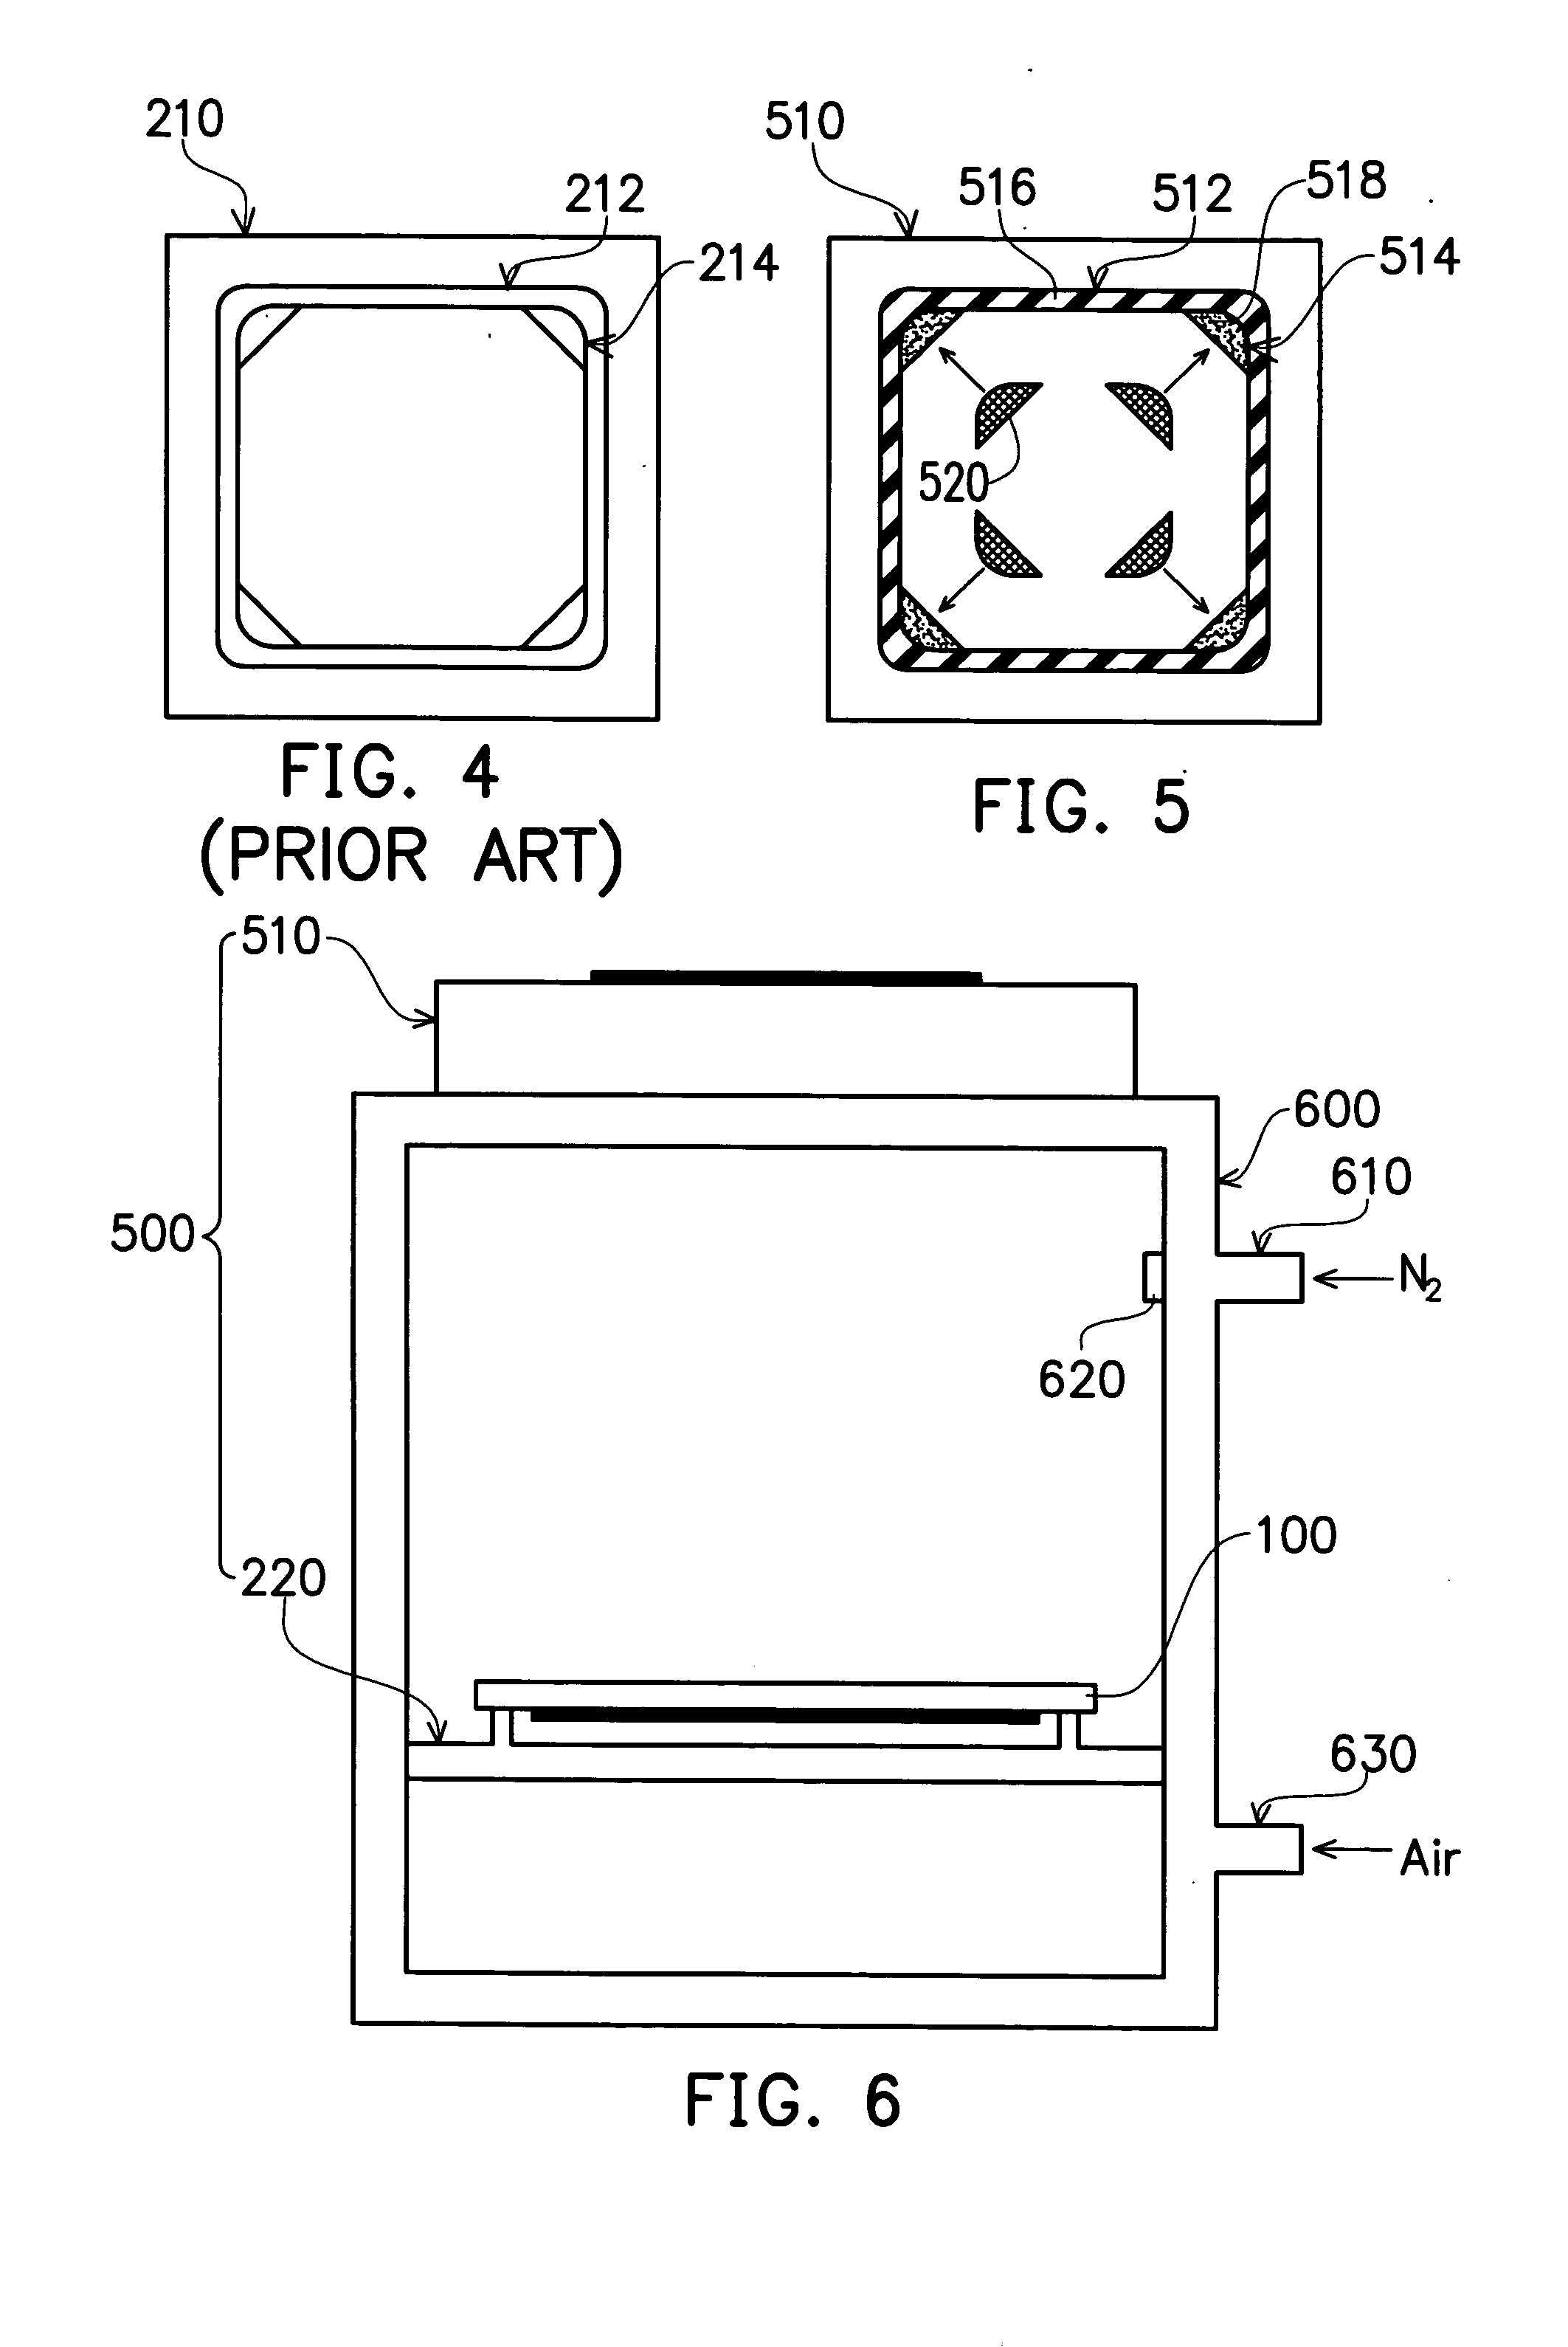 SMIF box and loading system of reticle